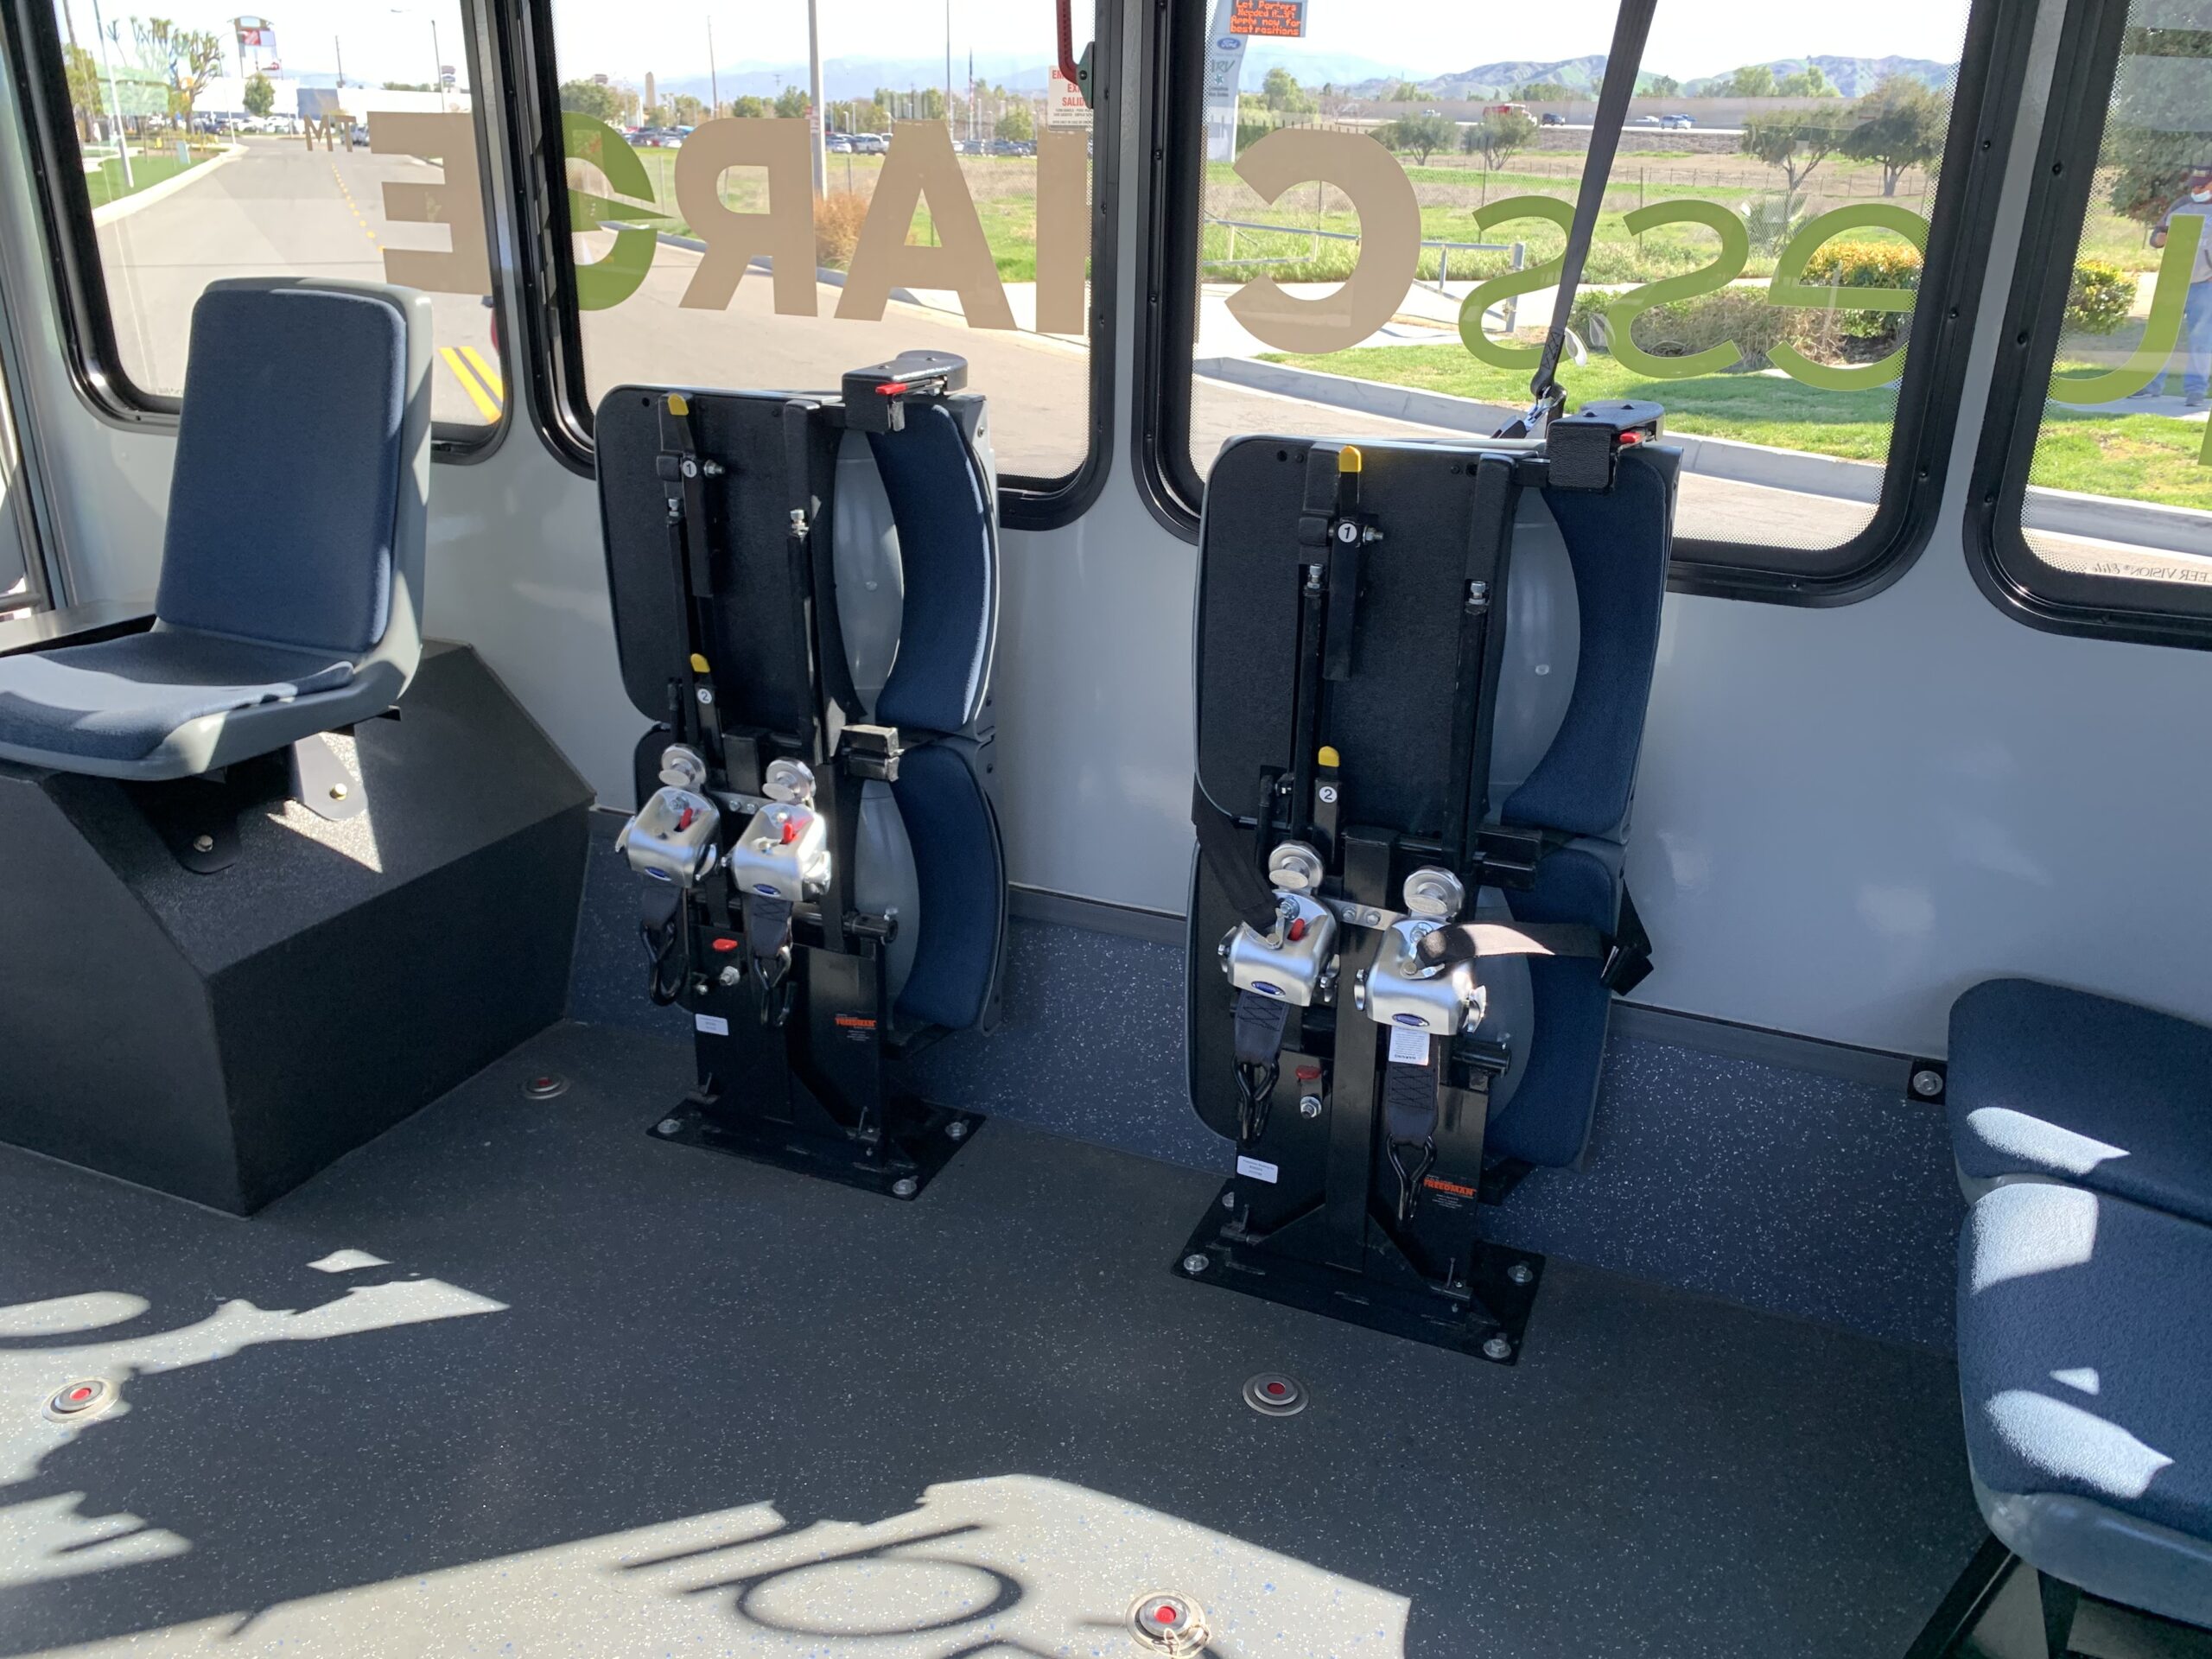 2021 ARBOC Equess CHARGE bus with two seats and a seat belt